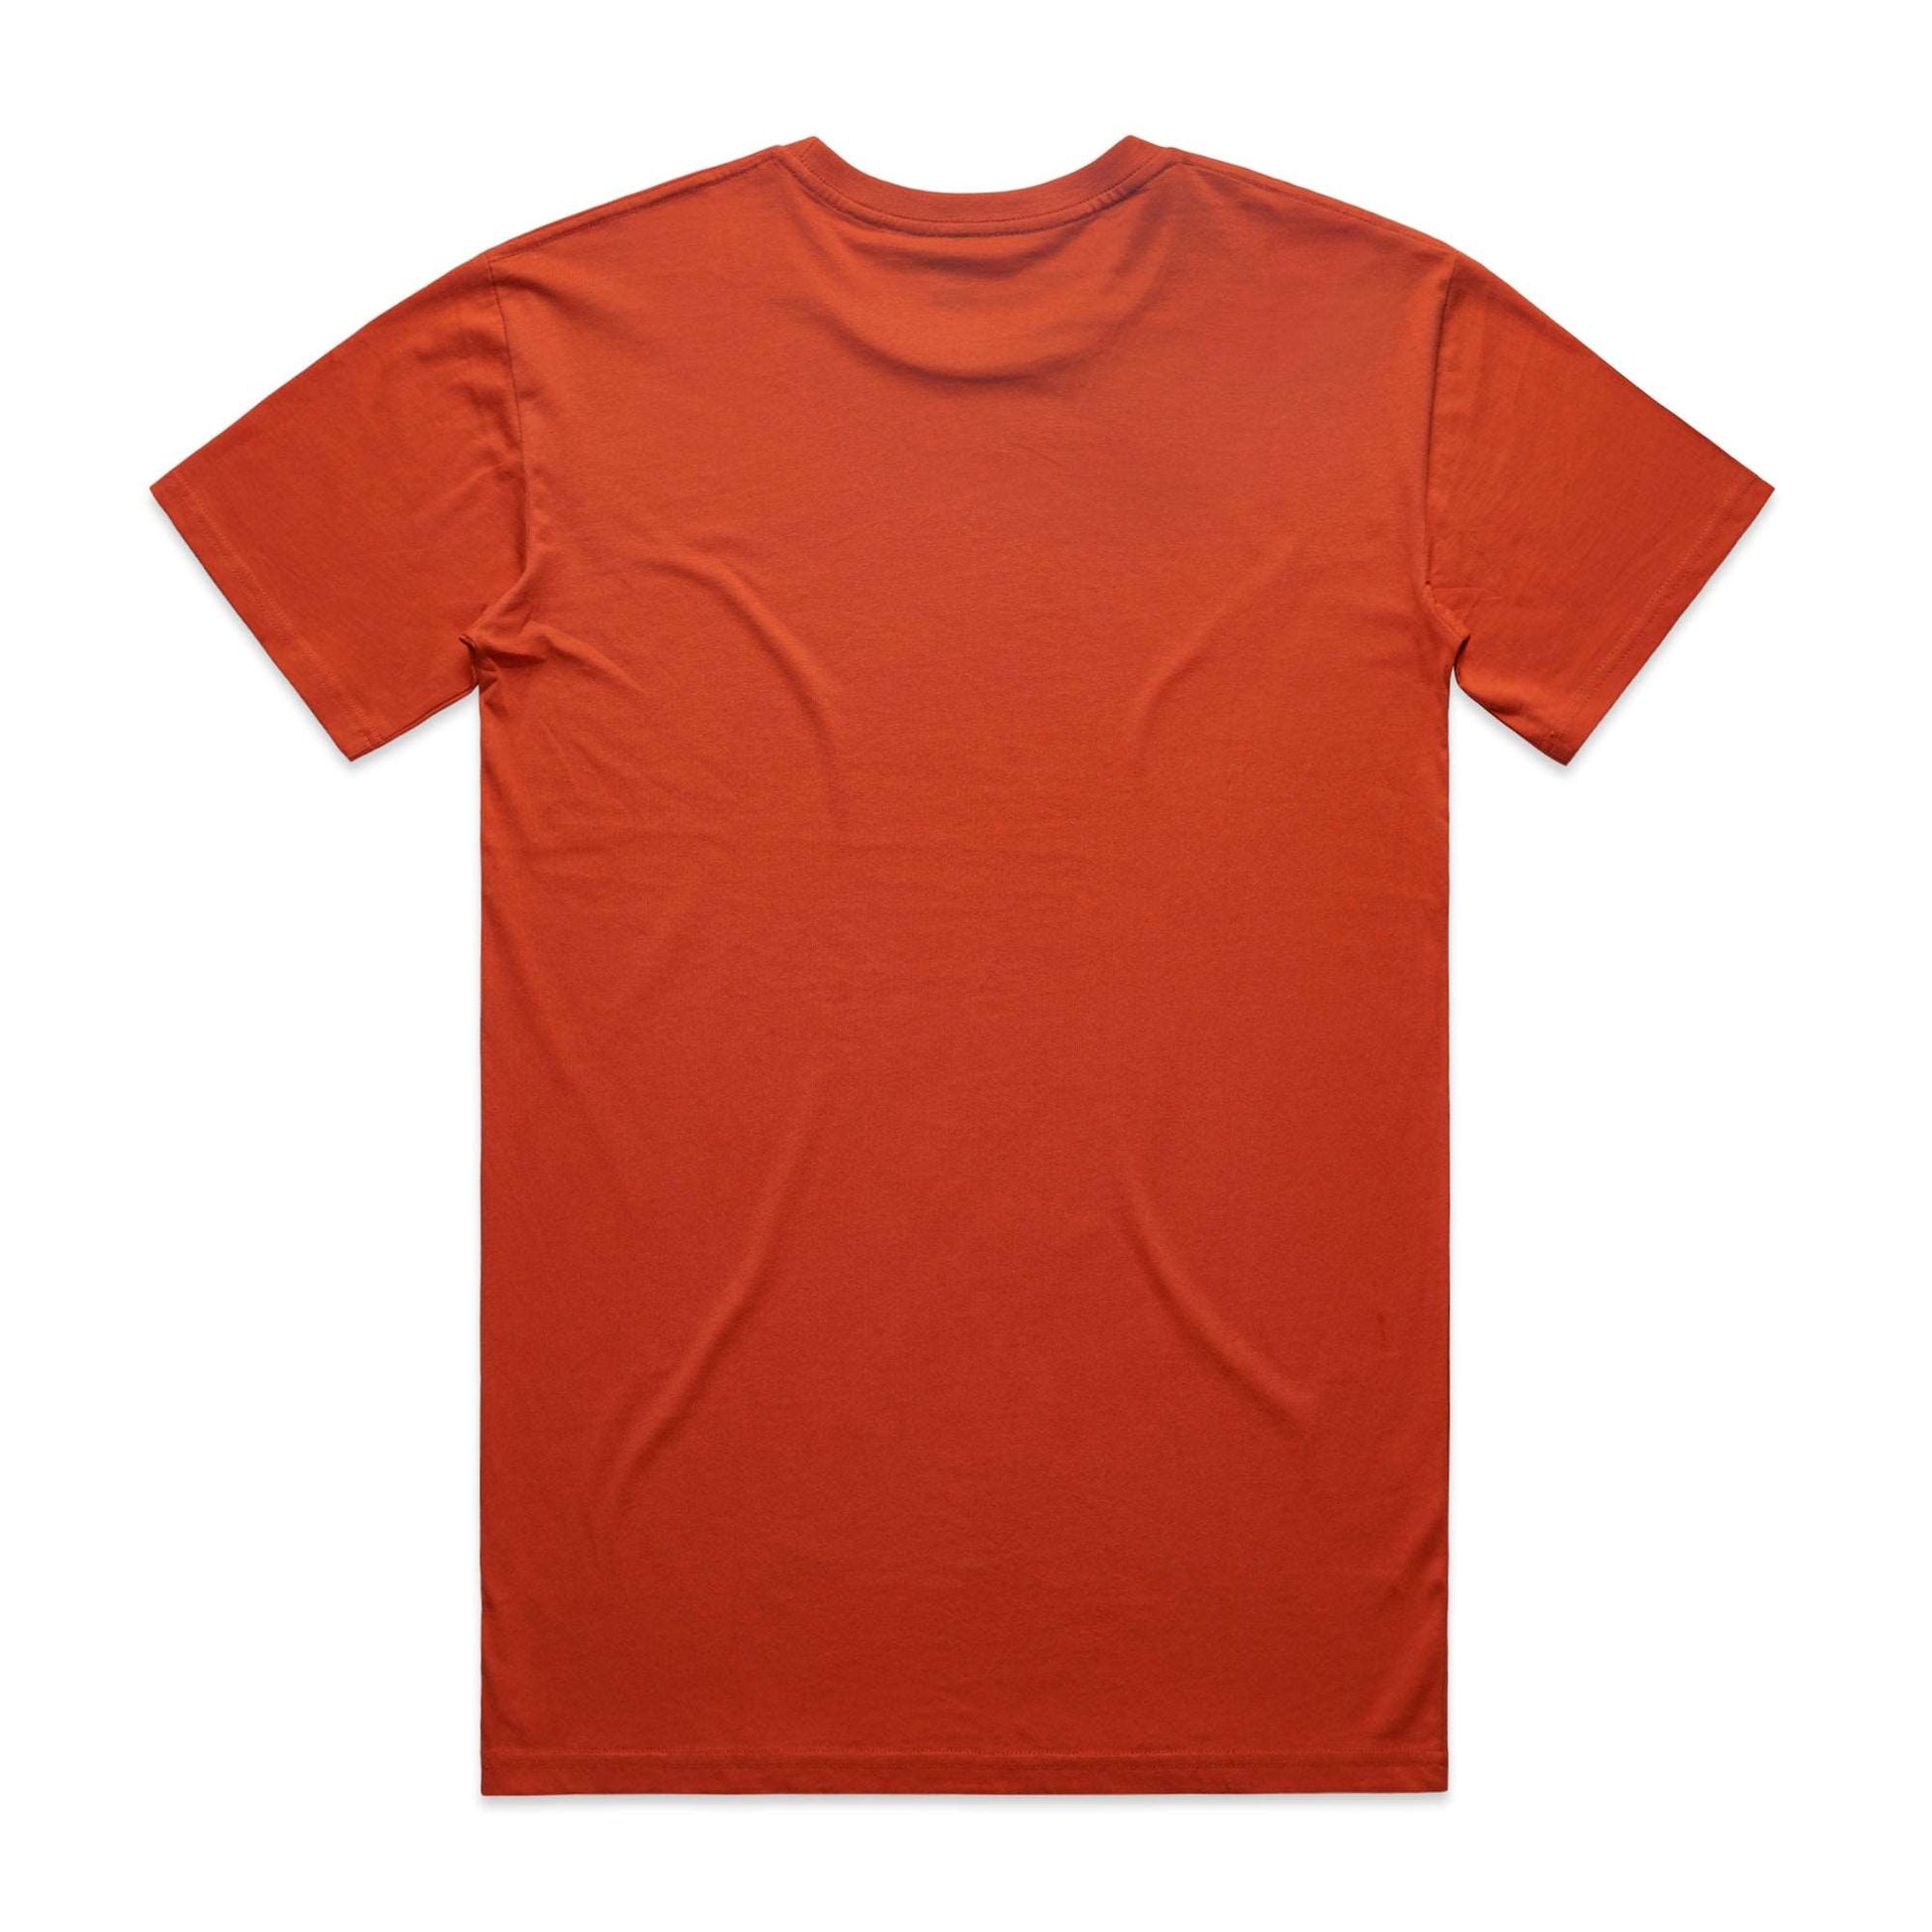 5001 - High Quality T shirts -  Spring and Fall Colors